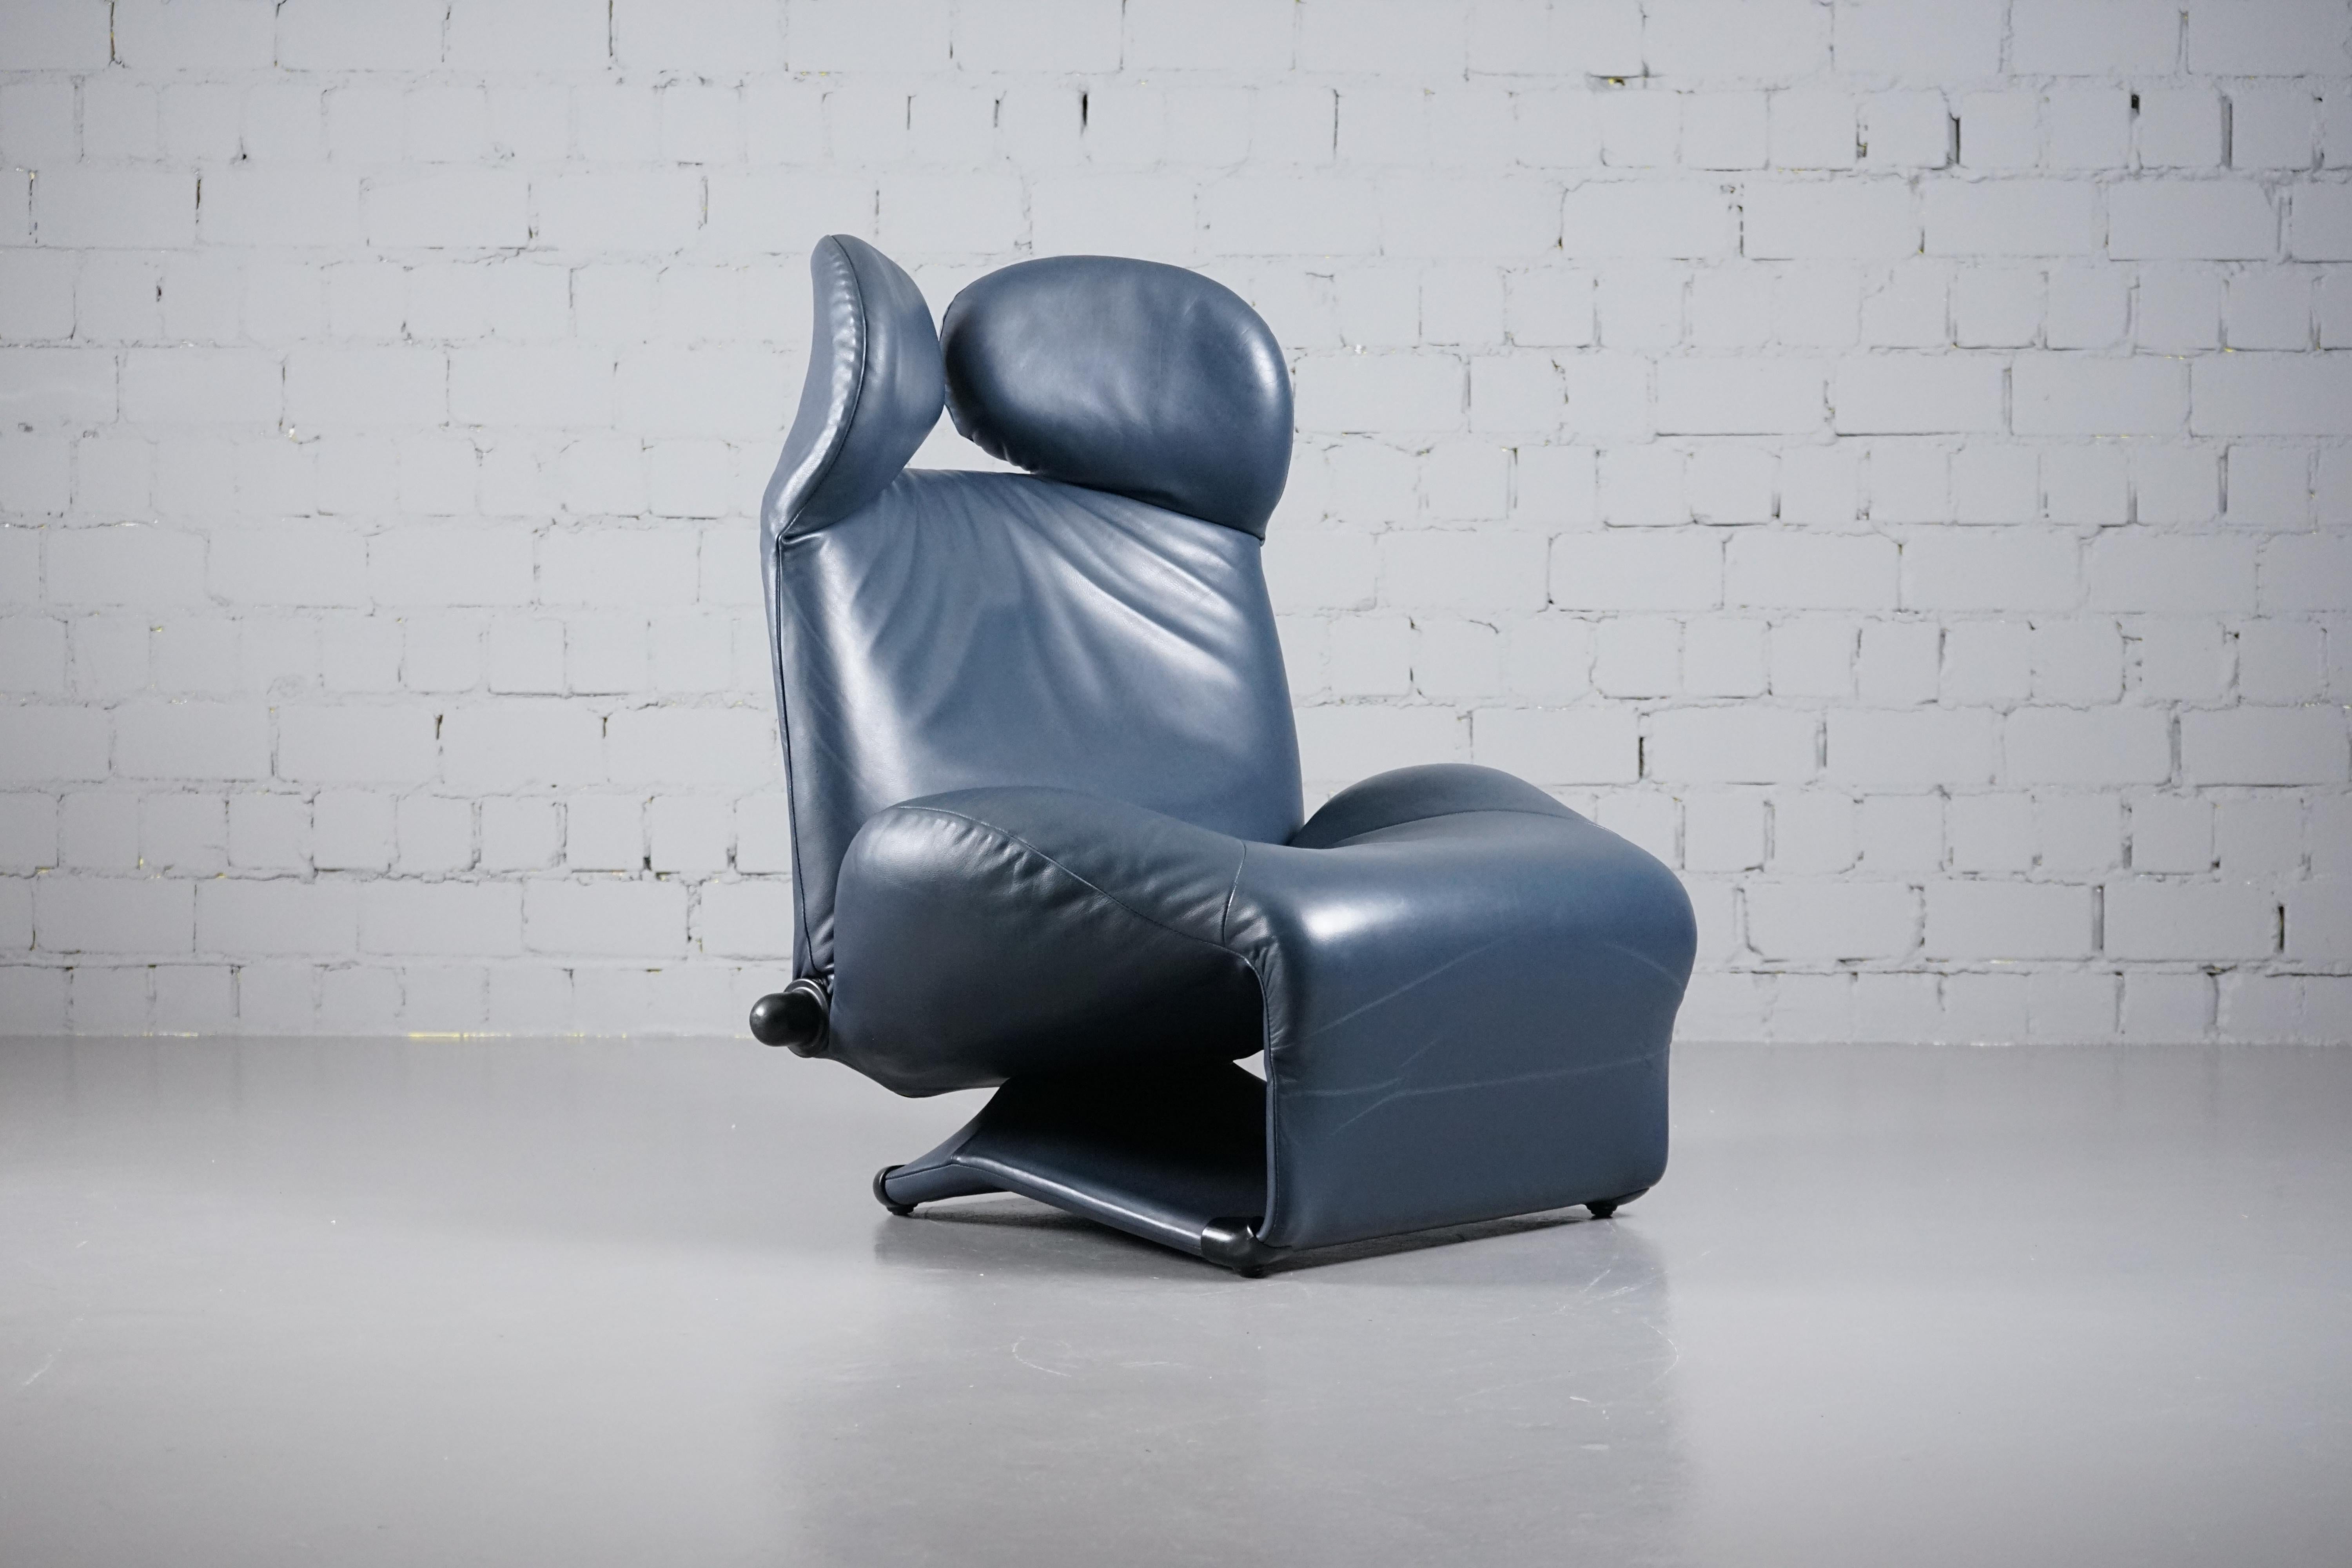 Grey-Blue Leather Wink Lounge Chair by Toshiyuki Kita for Cassina, 1980s For Sale 4